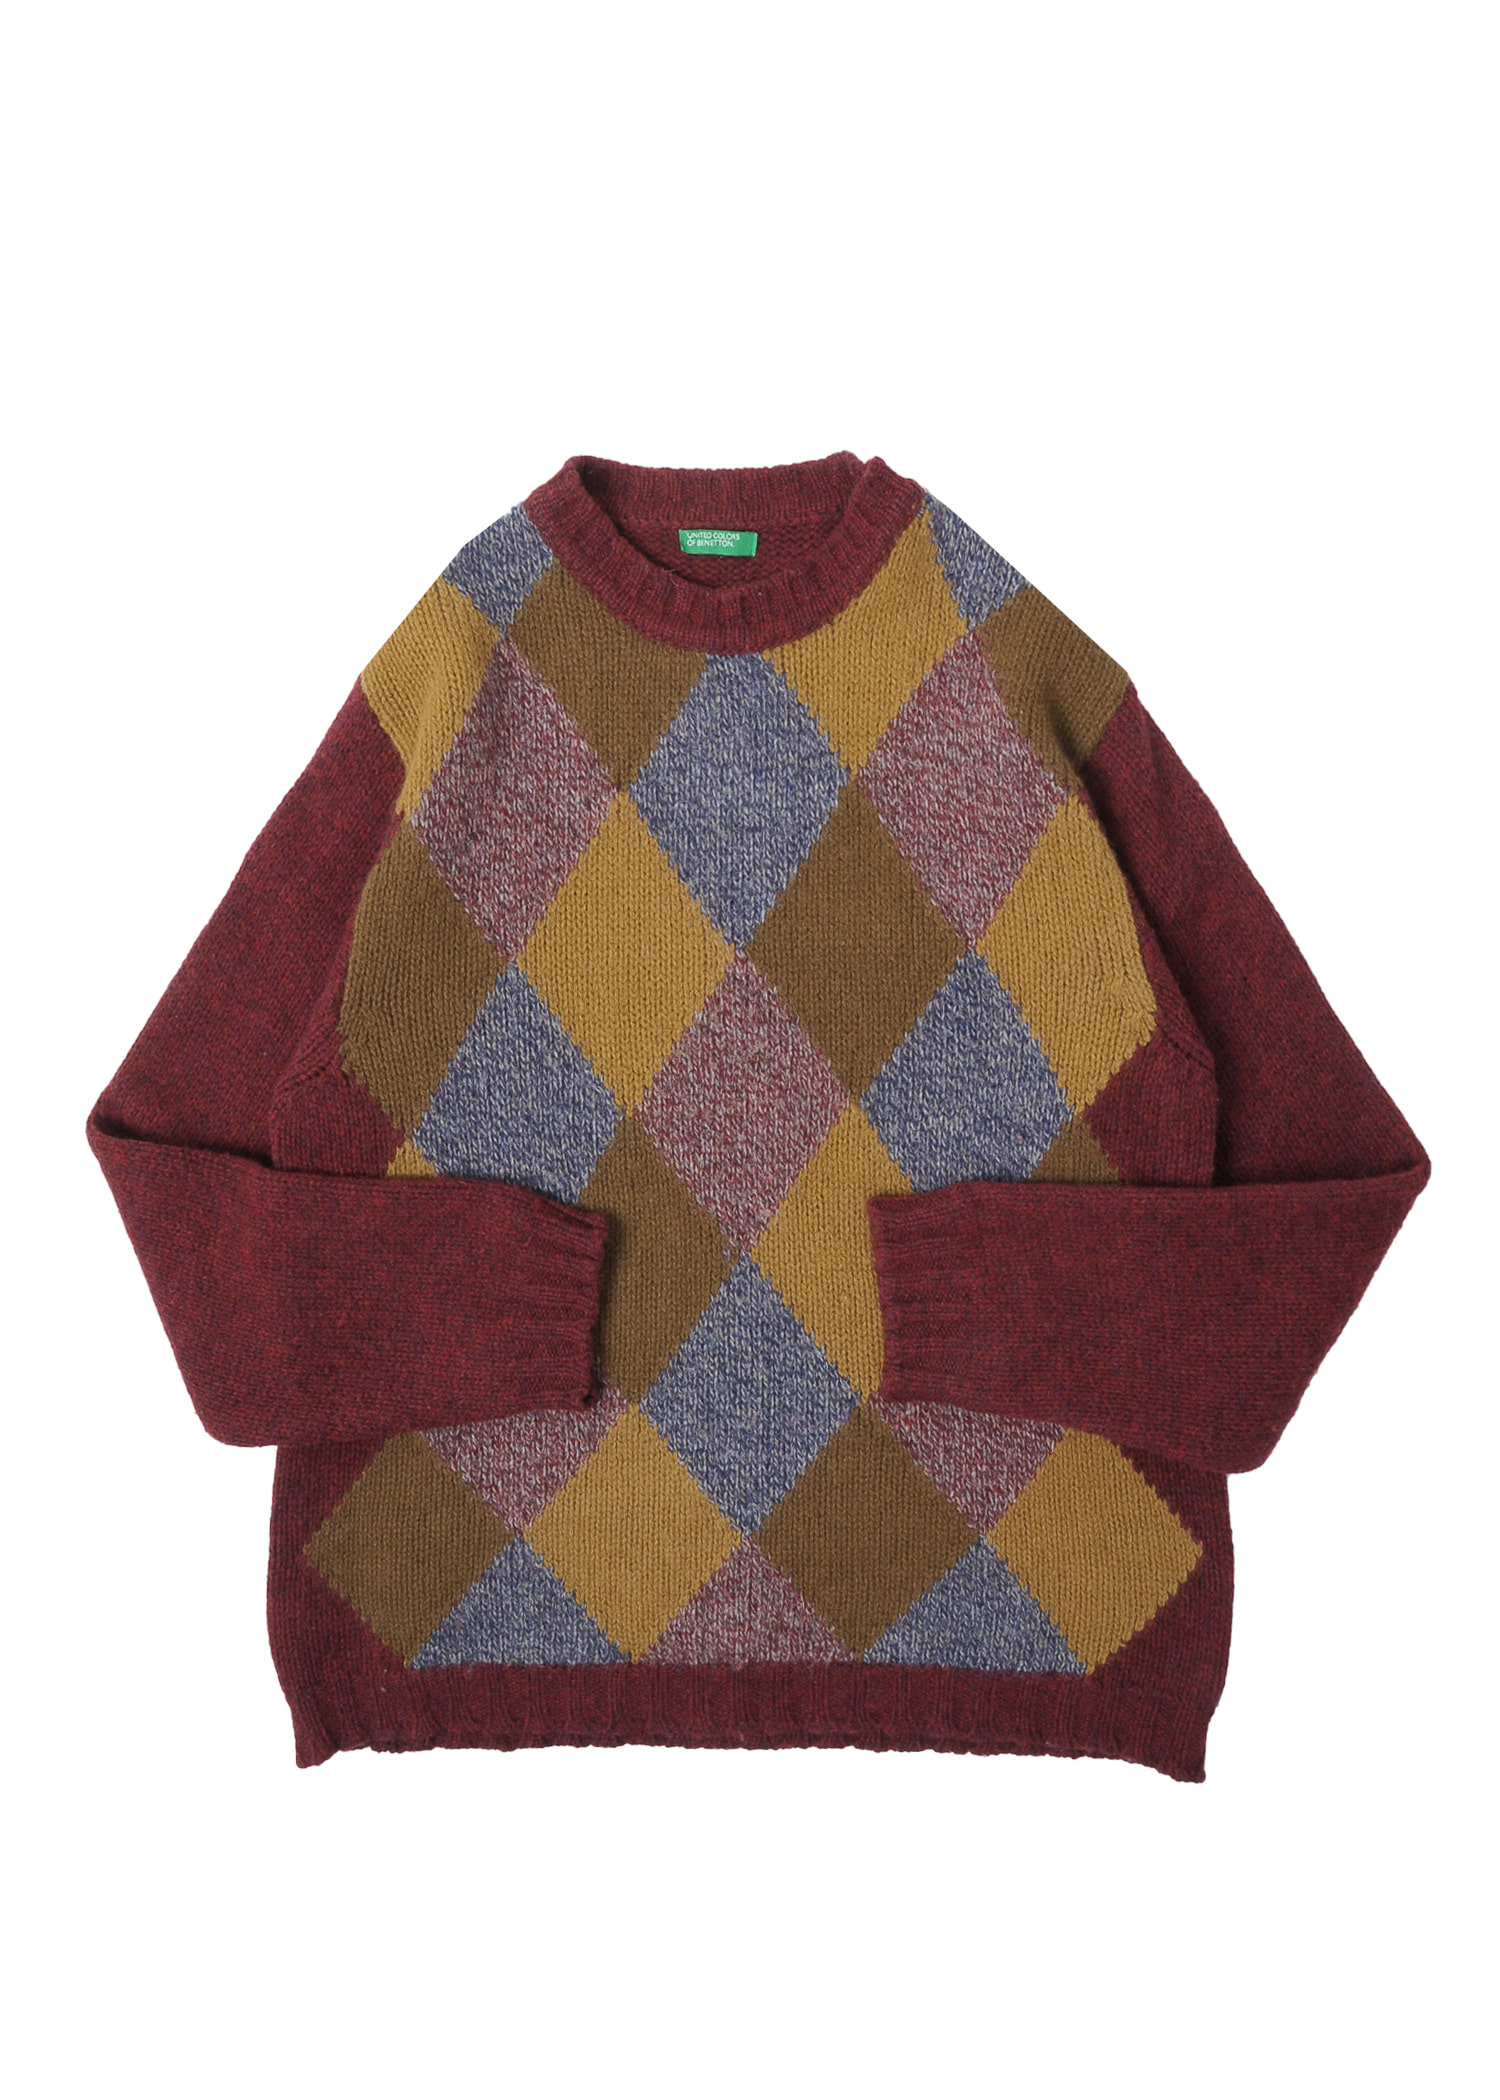 UNITED COLOR OF BENETTON knit